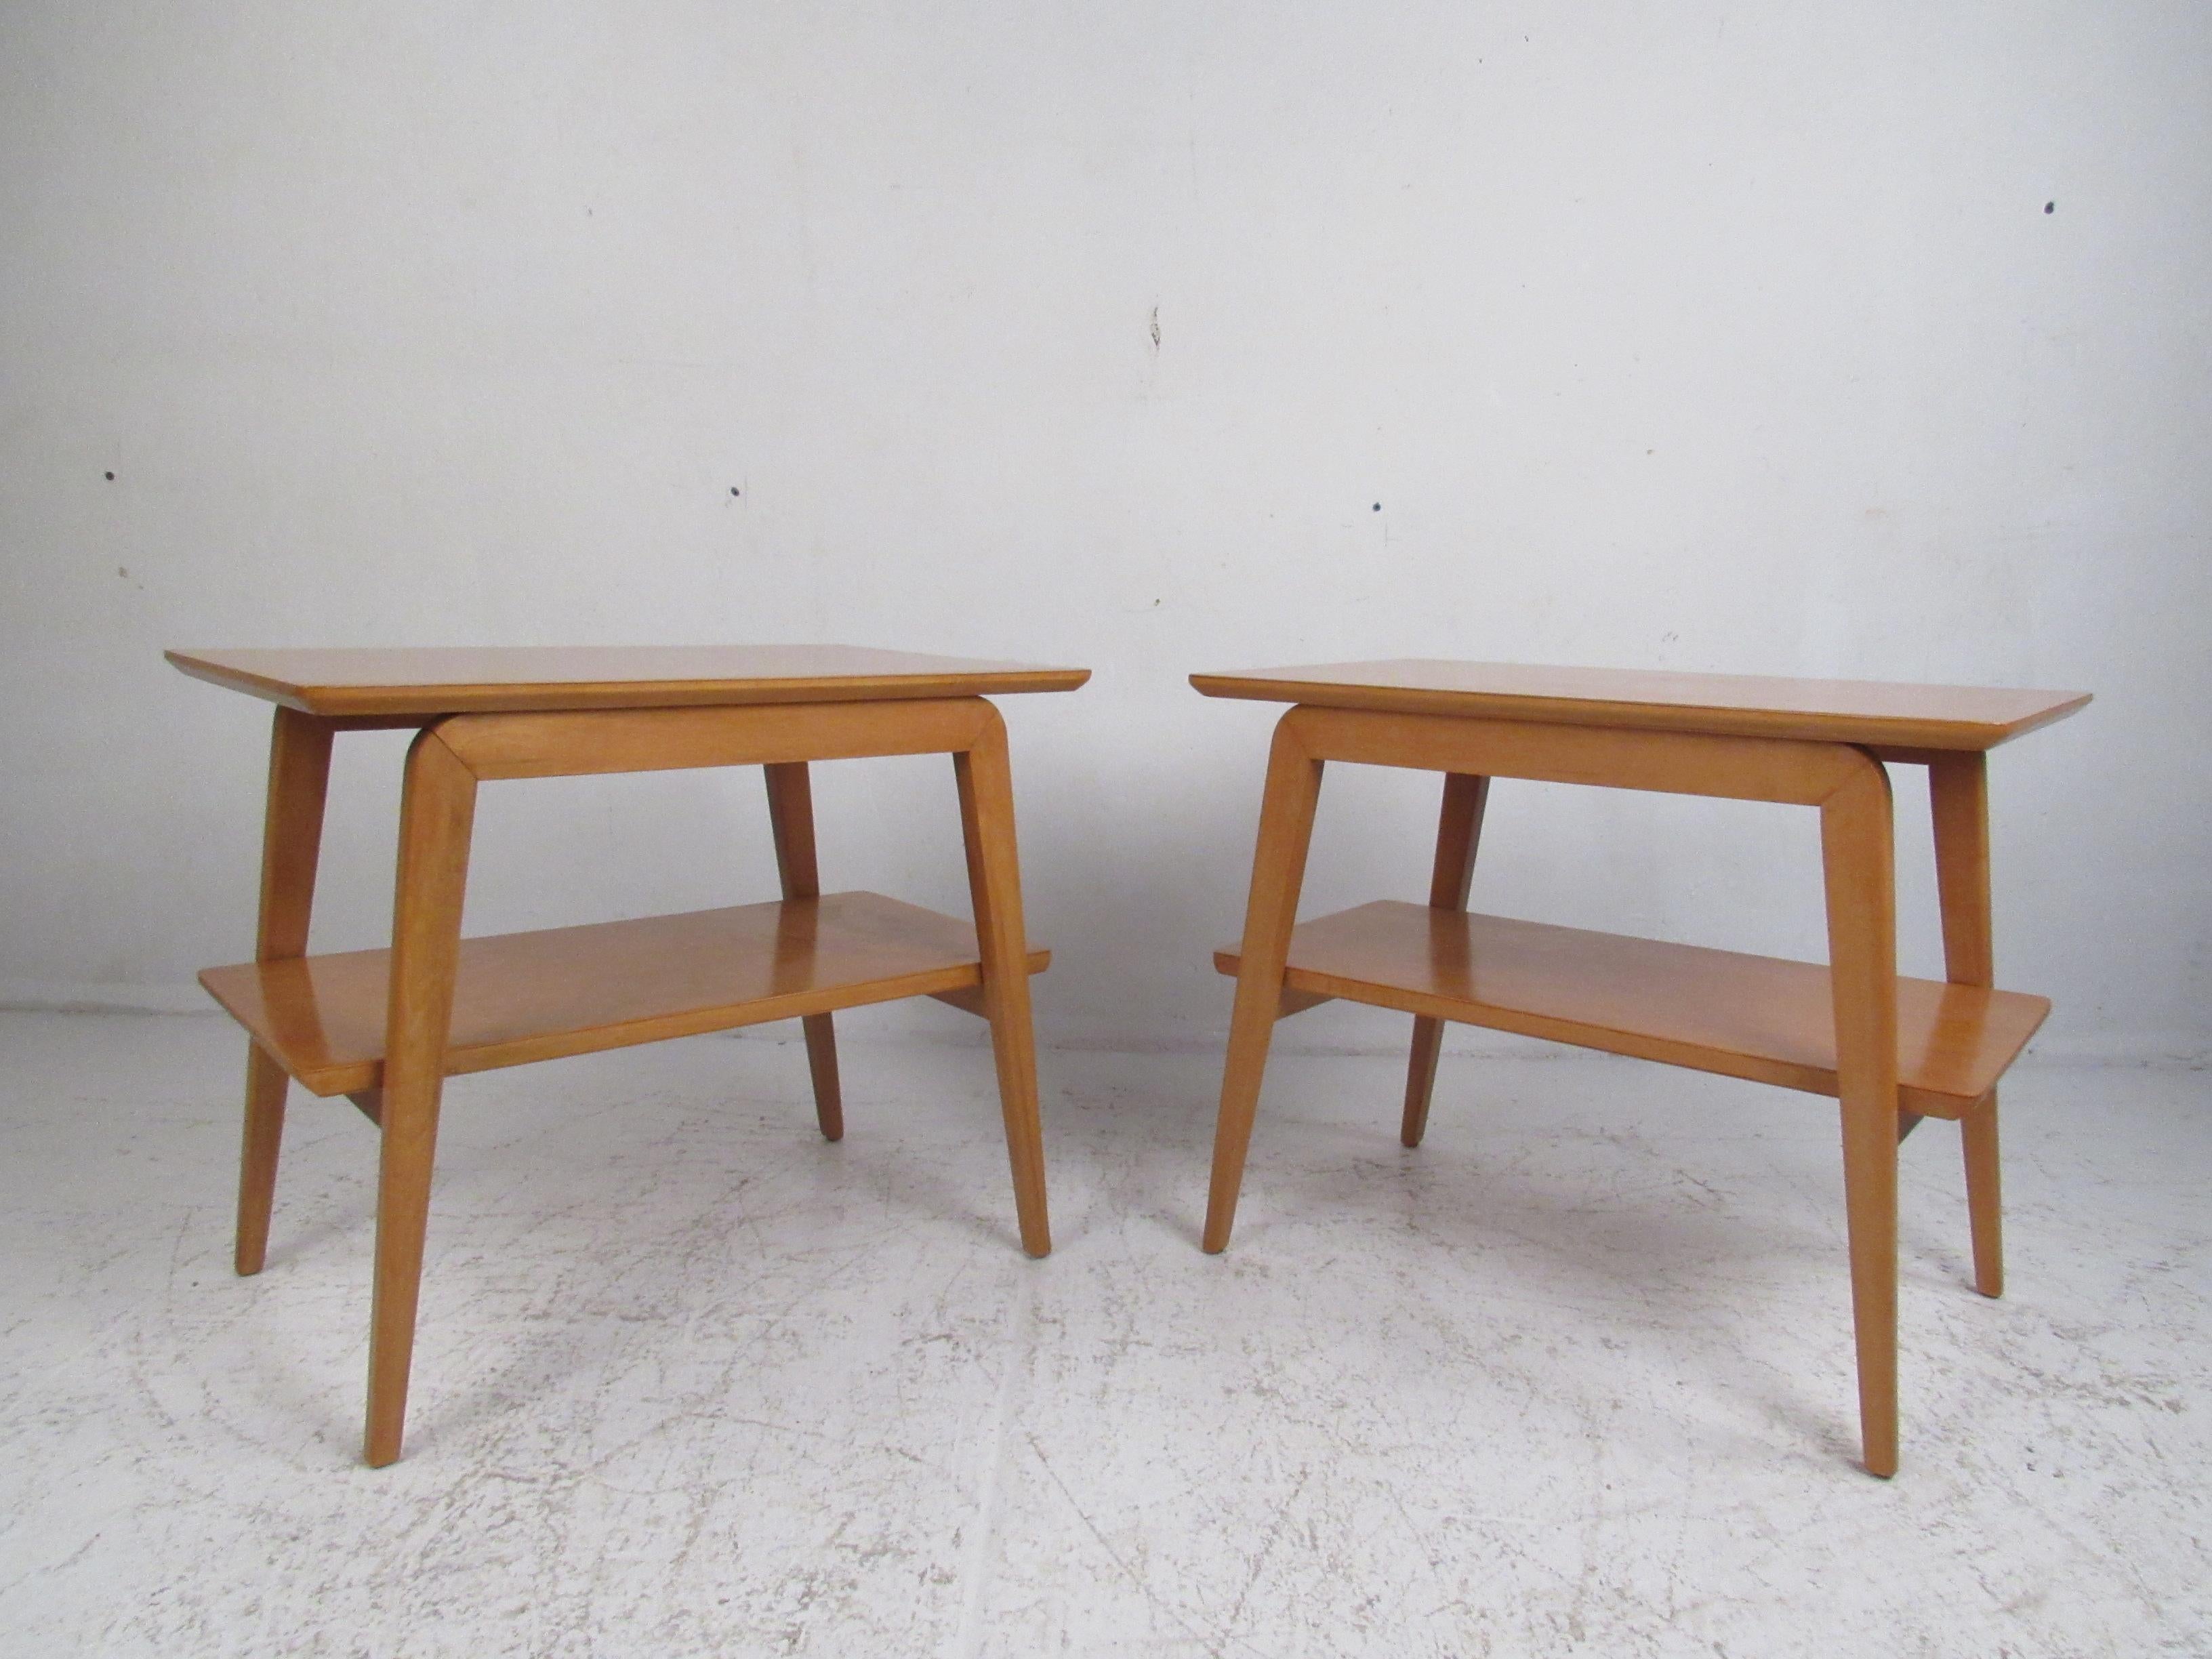 This beautiful pair of Mid-Century Modern two-tier side tables boast angled legs that taper downward and a vintage maple finish. The sleek design with a lower shelf ensures plenty of room to set and store items. This stylish pair of end tables make